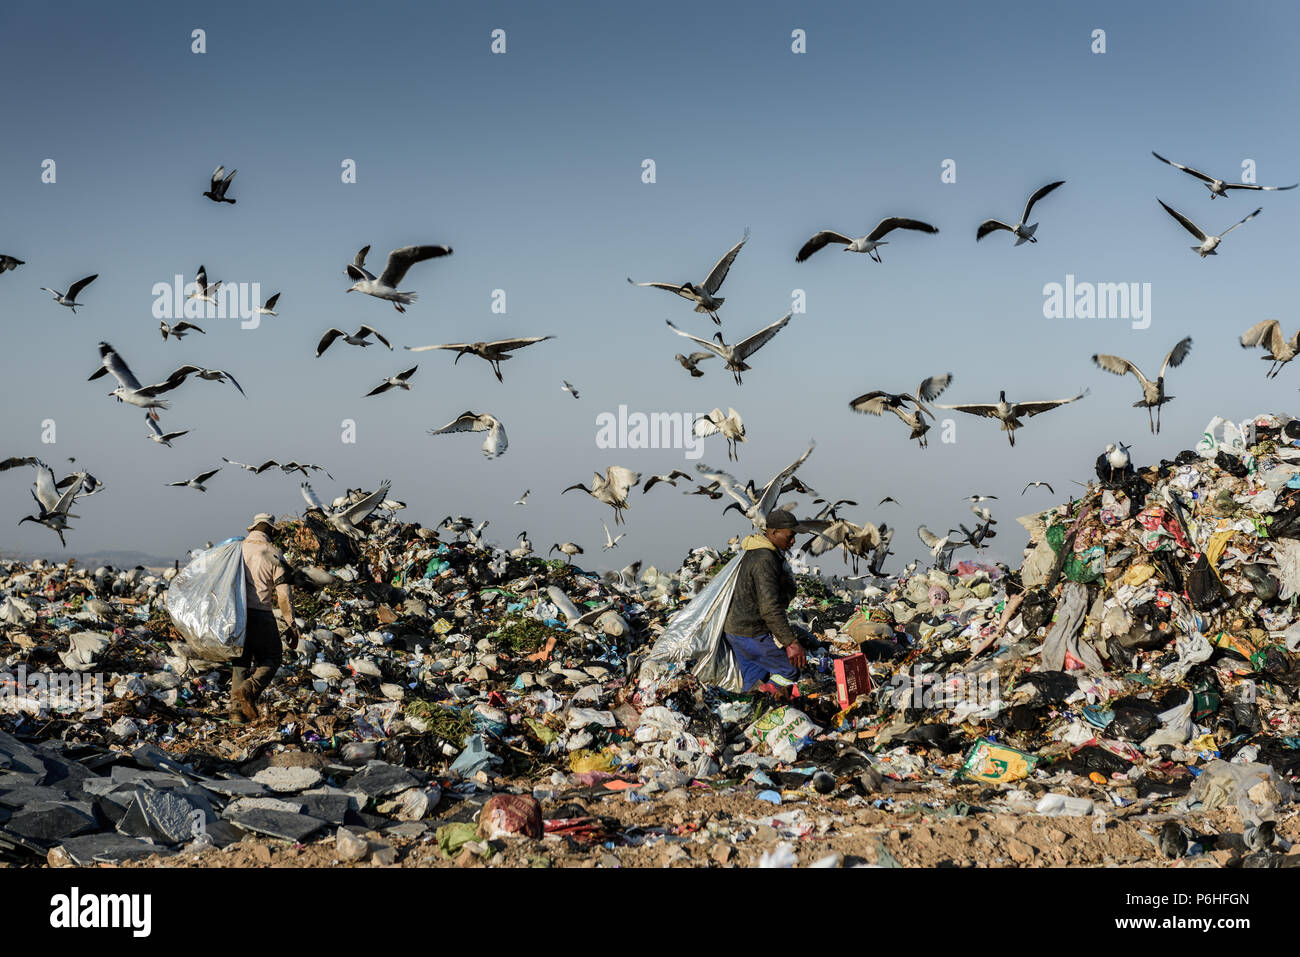 Pickers sorting through the Robinson Deep land fill in South Africa's commercial capital of Johannesburg below a flock of Sacred Ibis and seagulls Stock Photo